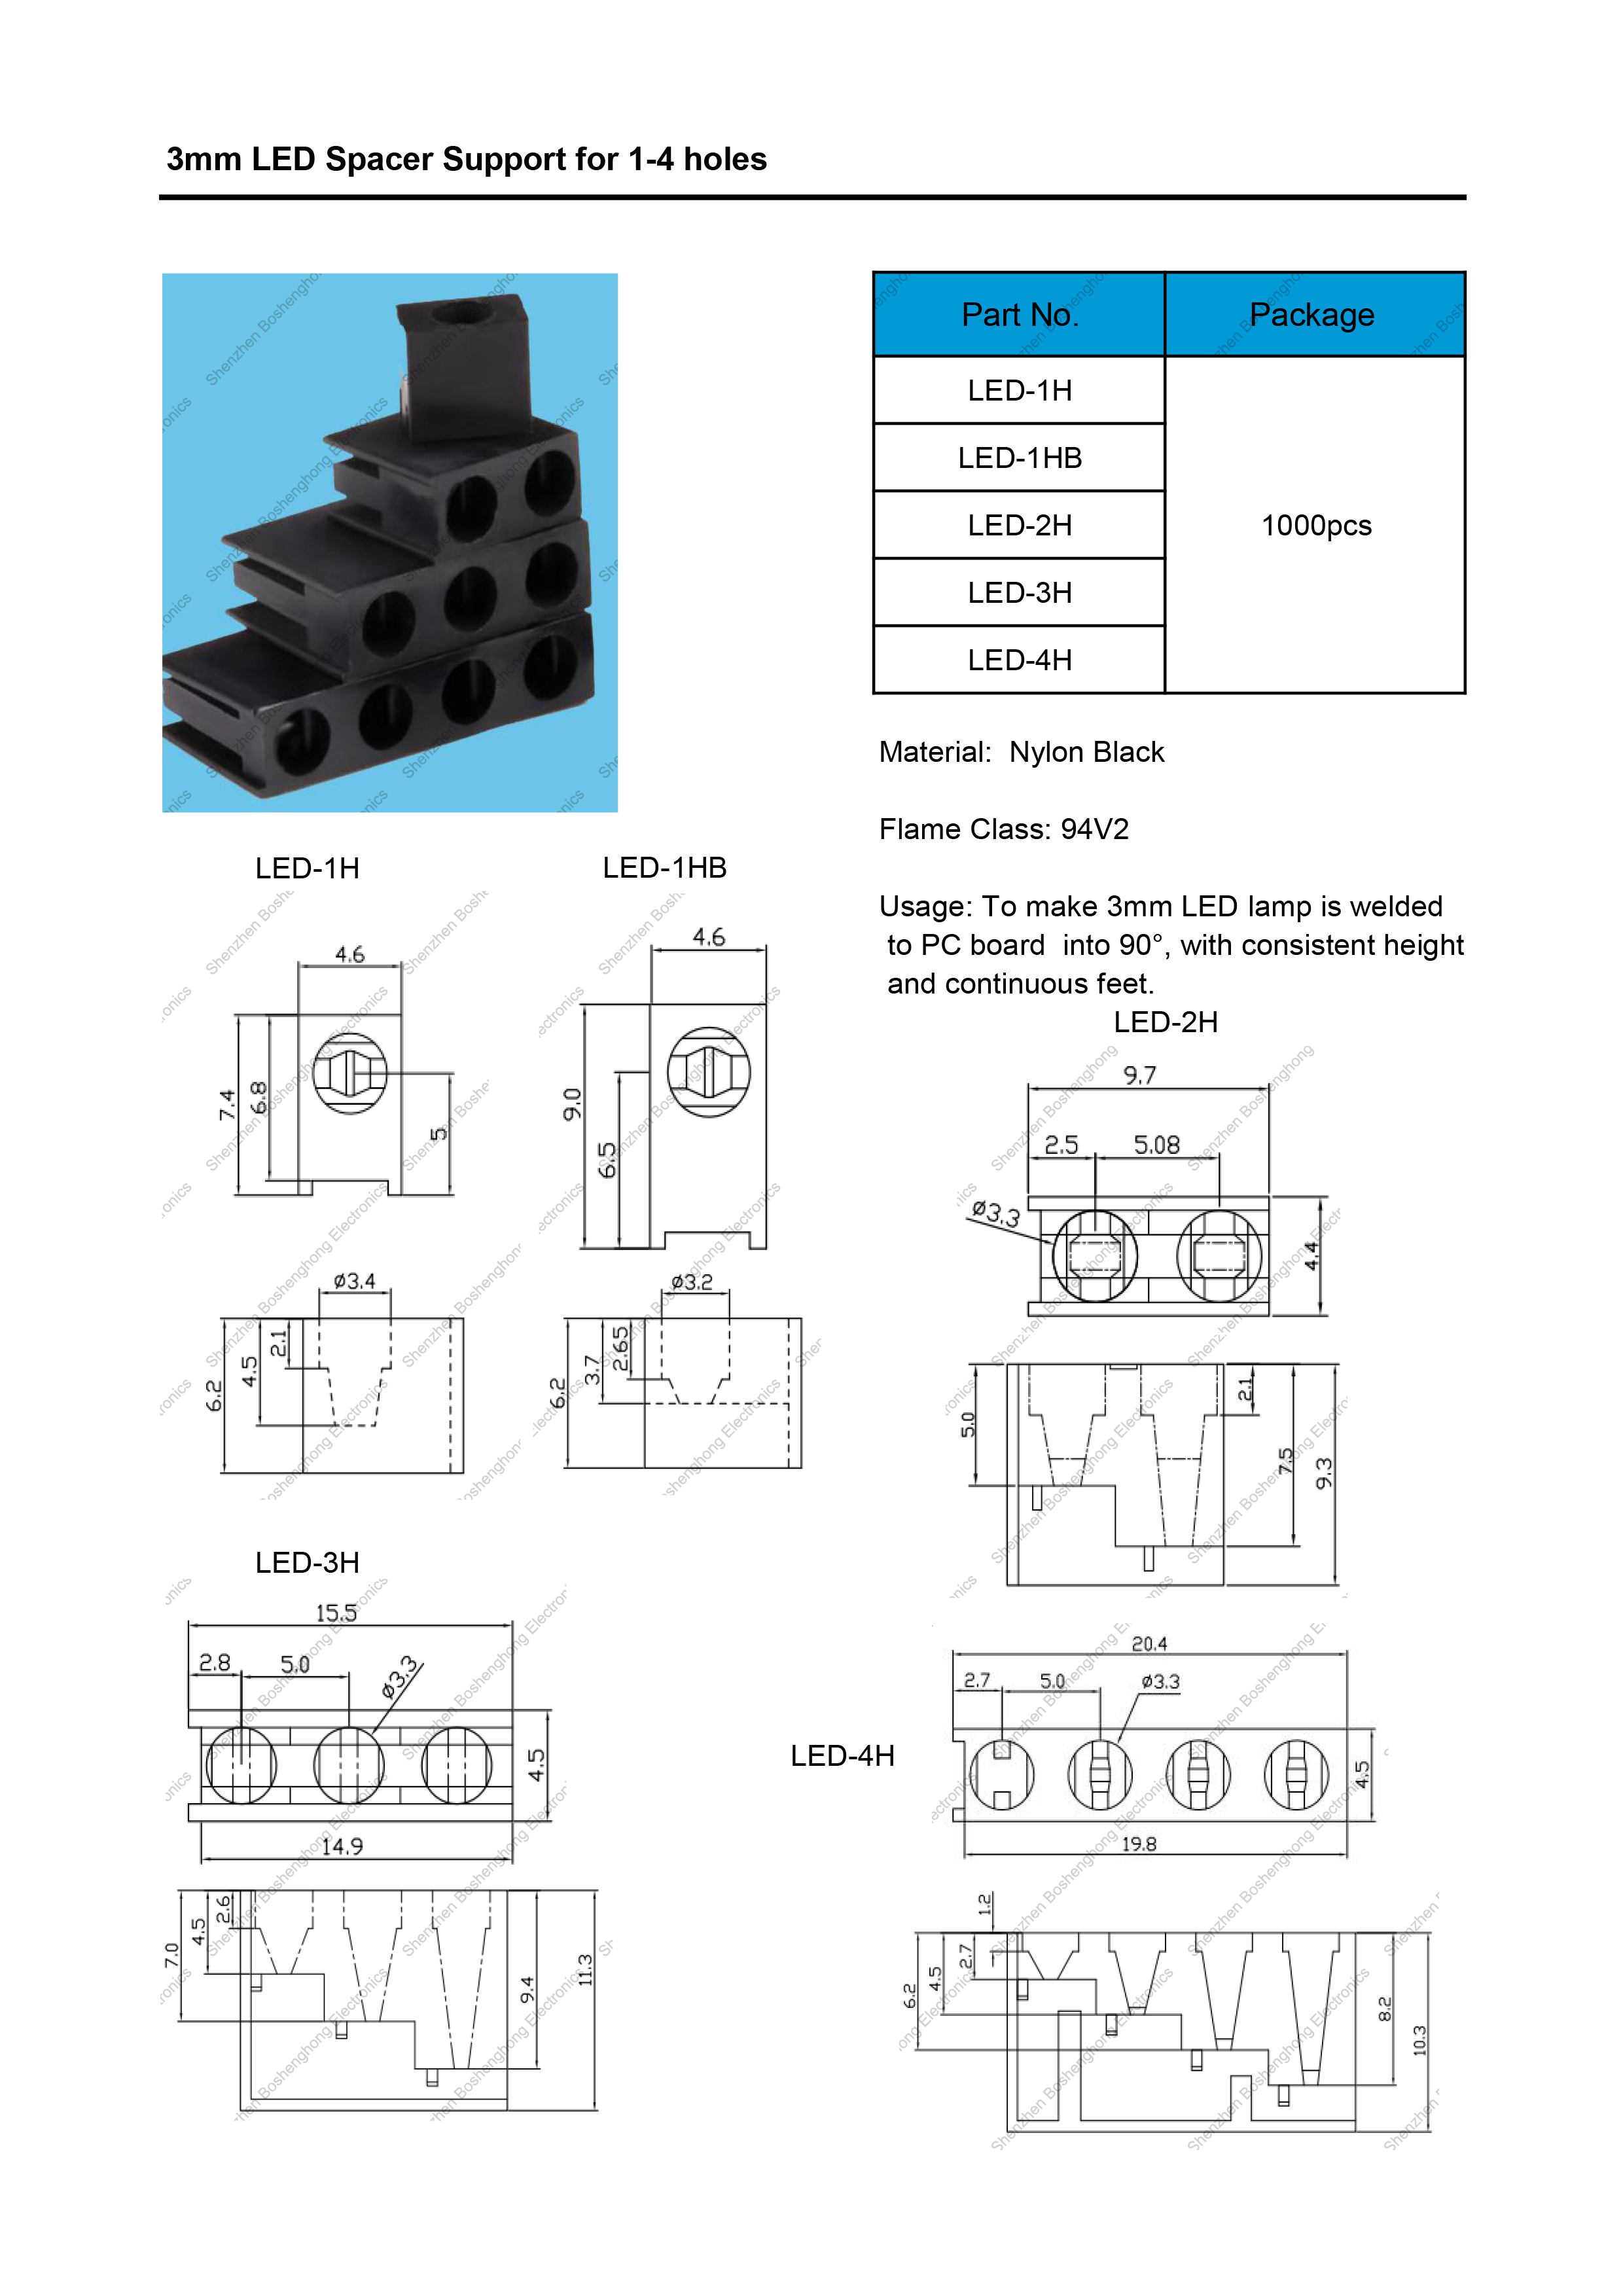 LED spacer support specification.jpg